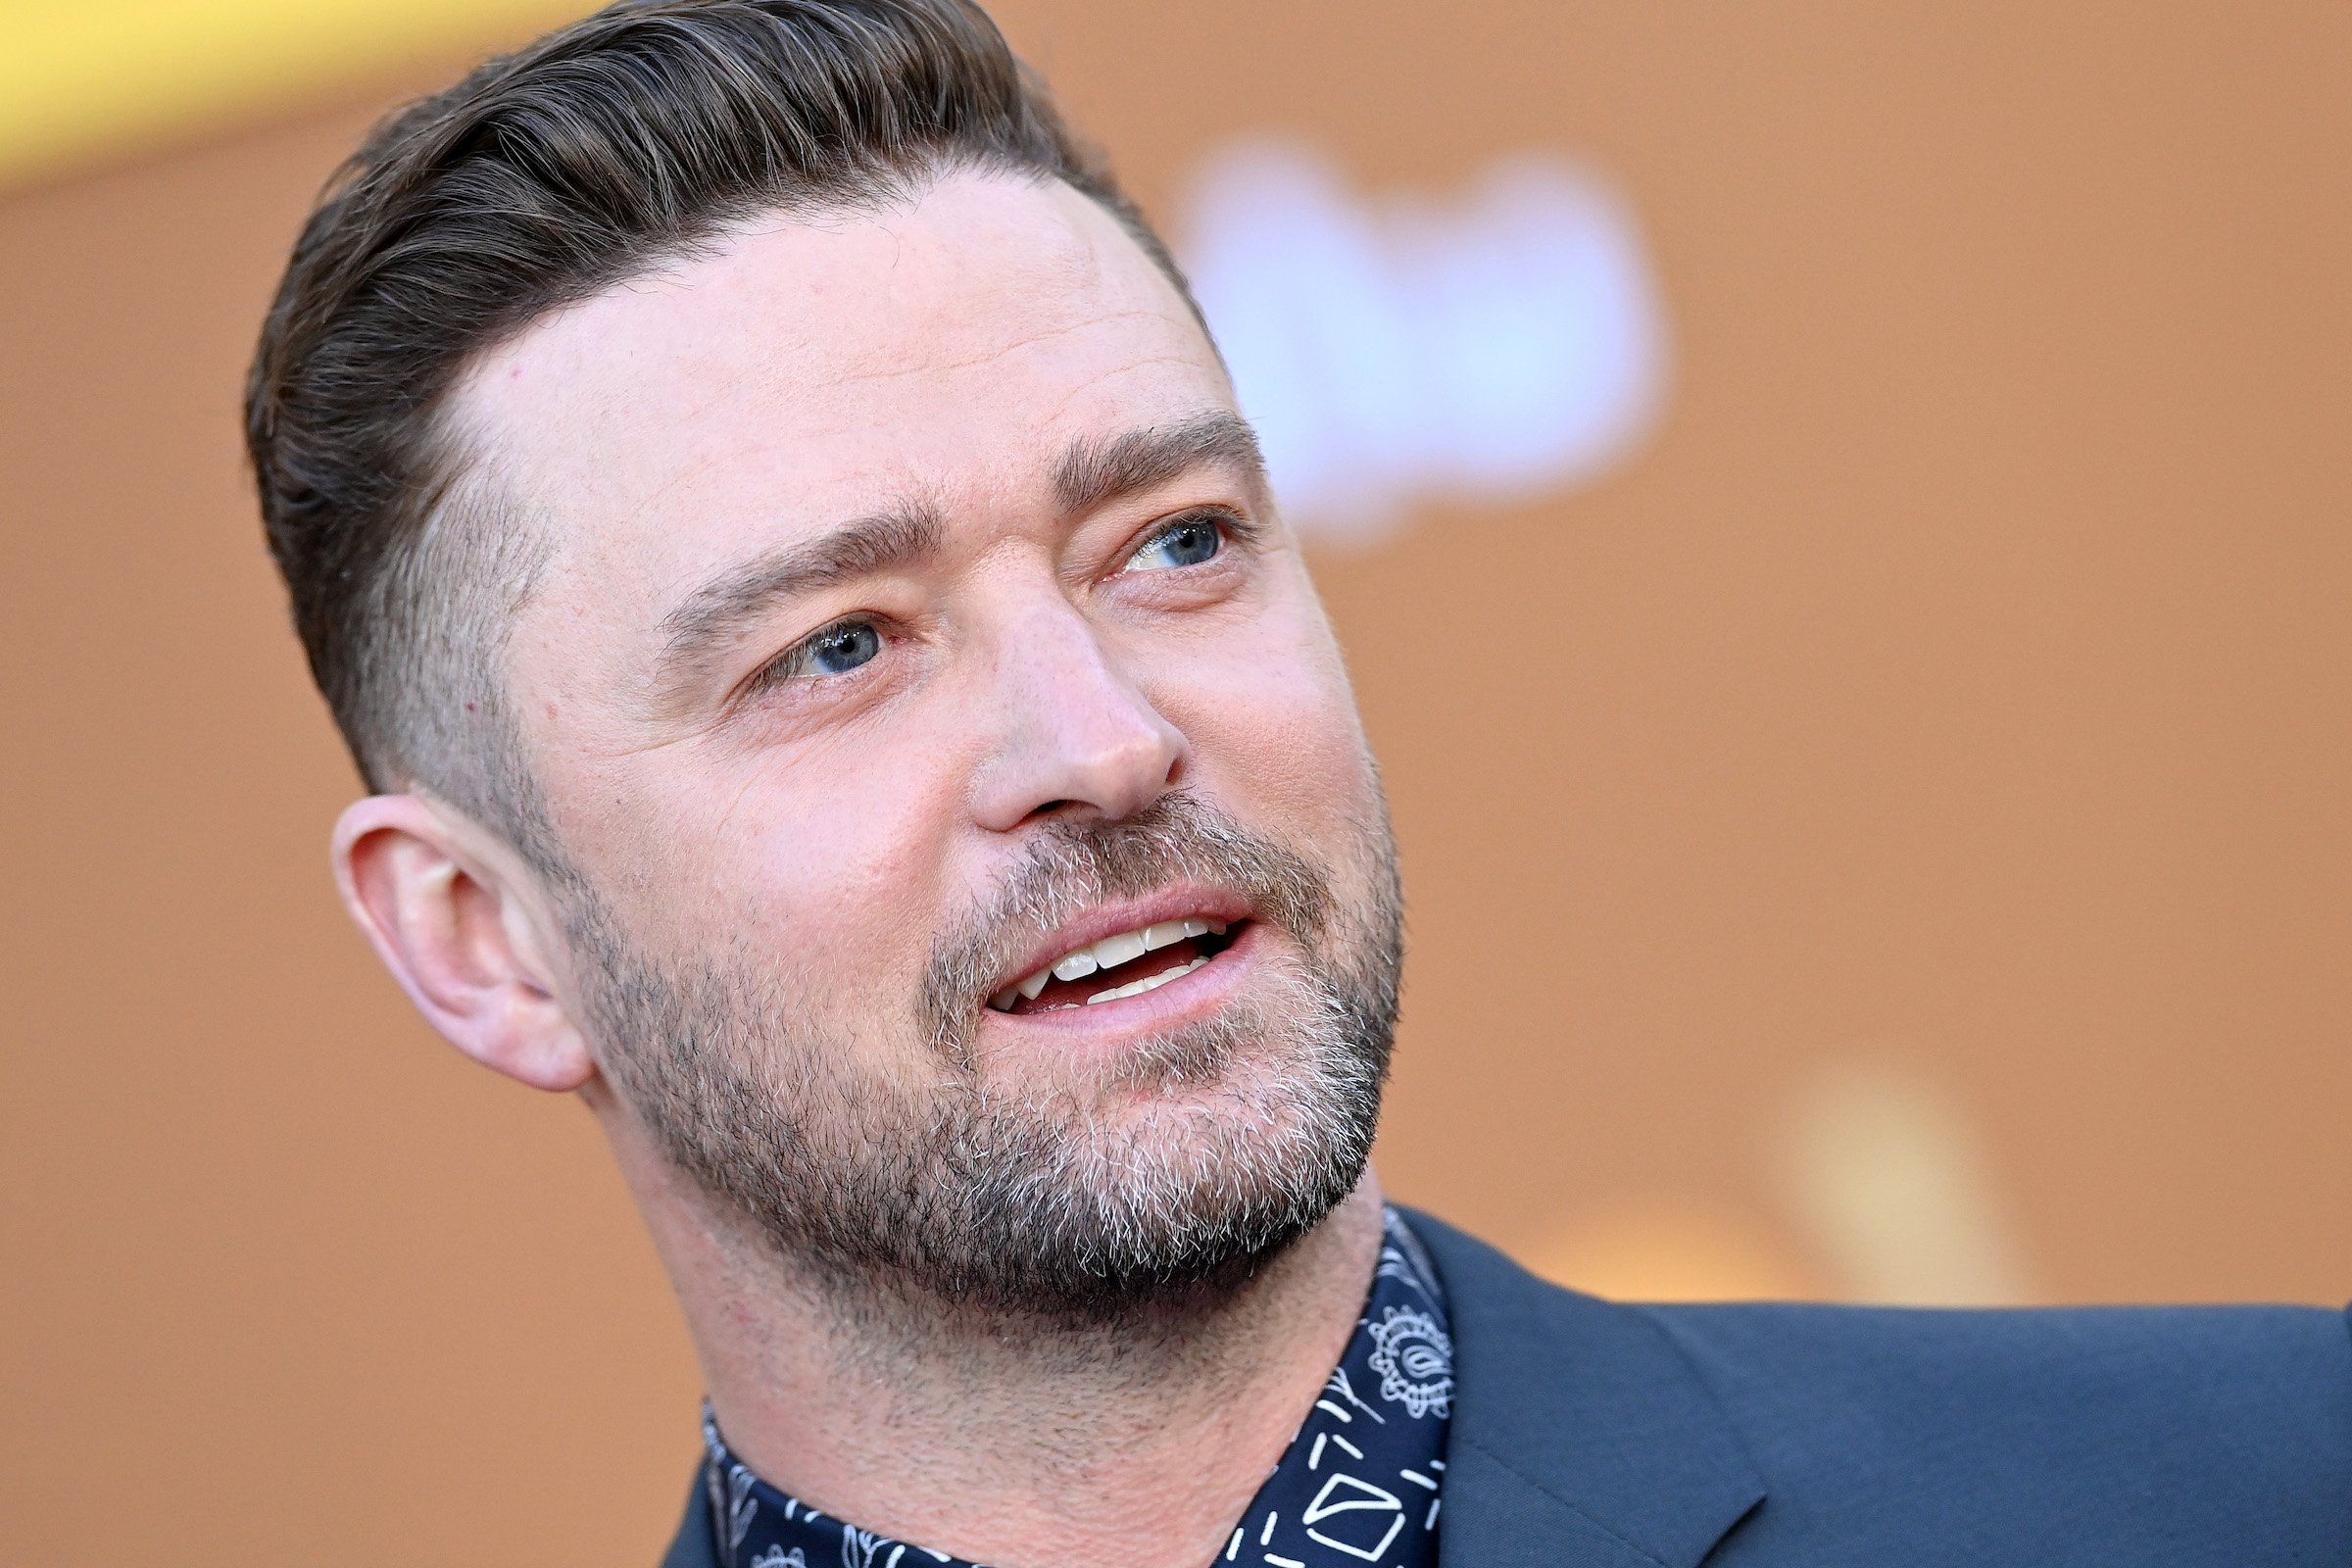 Justin Timberlake's Net Worth After the Sale of His Massive Music Catalog